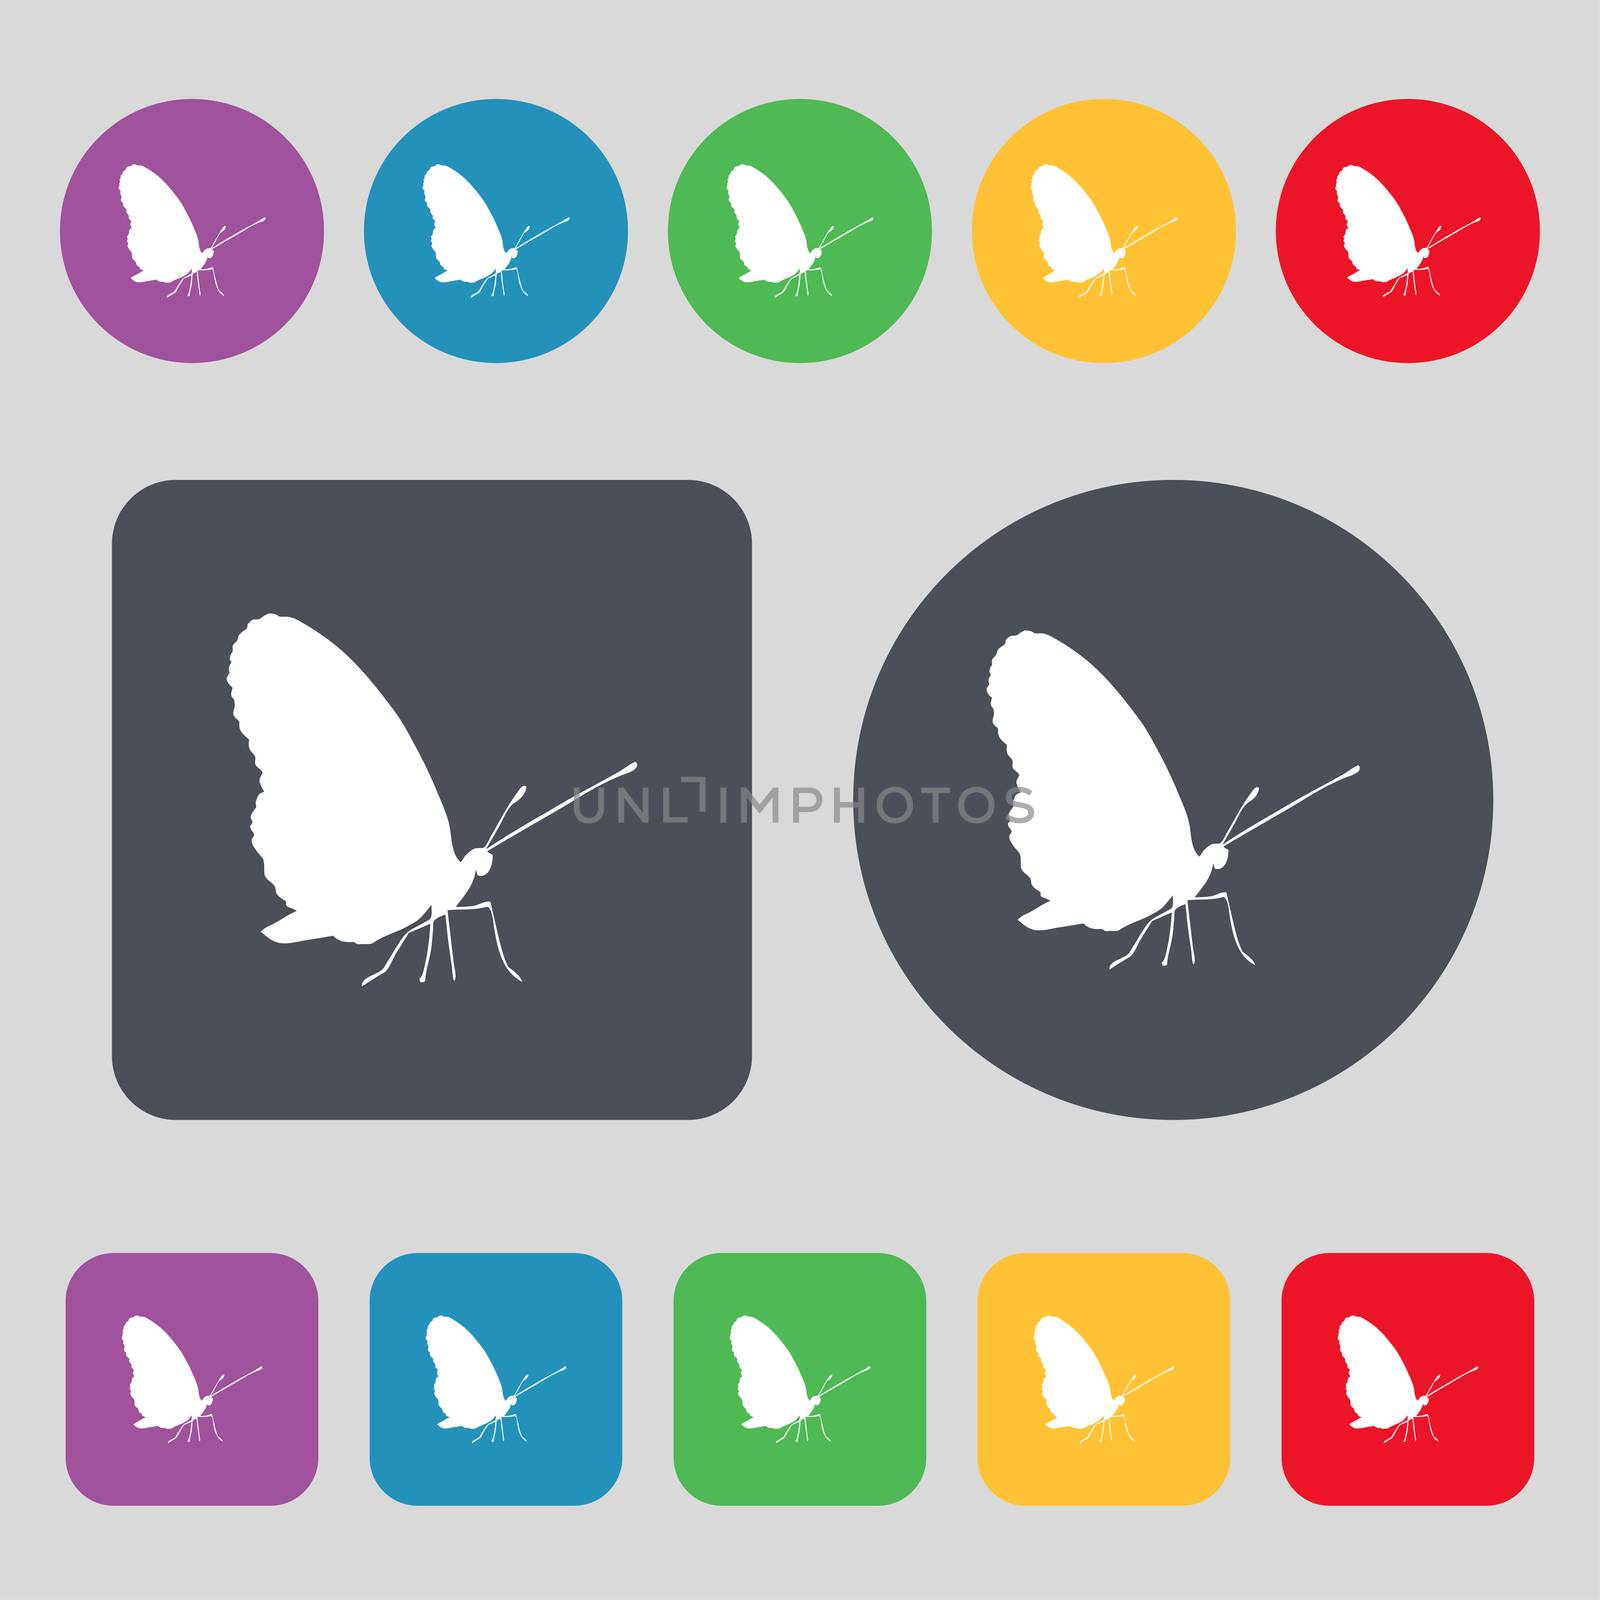 butterfly icon sign. A set of 12 colored buttons. Flat design. illustration